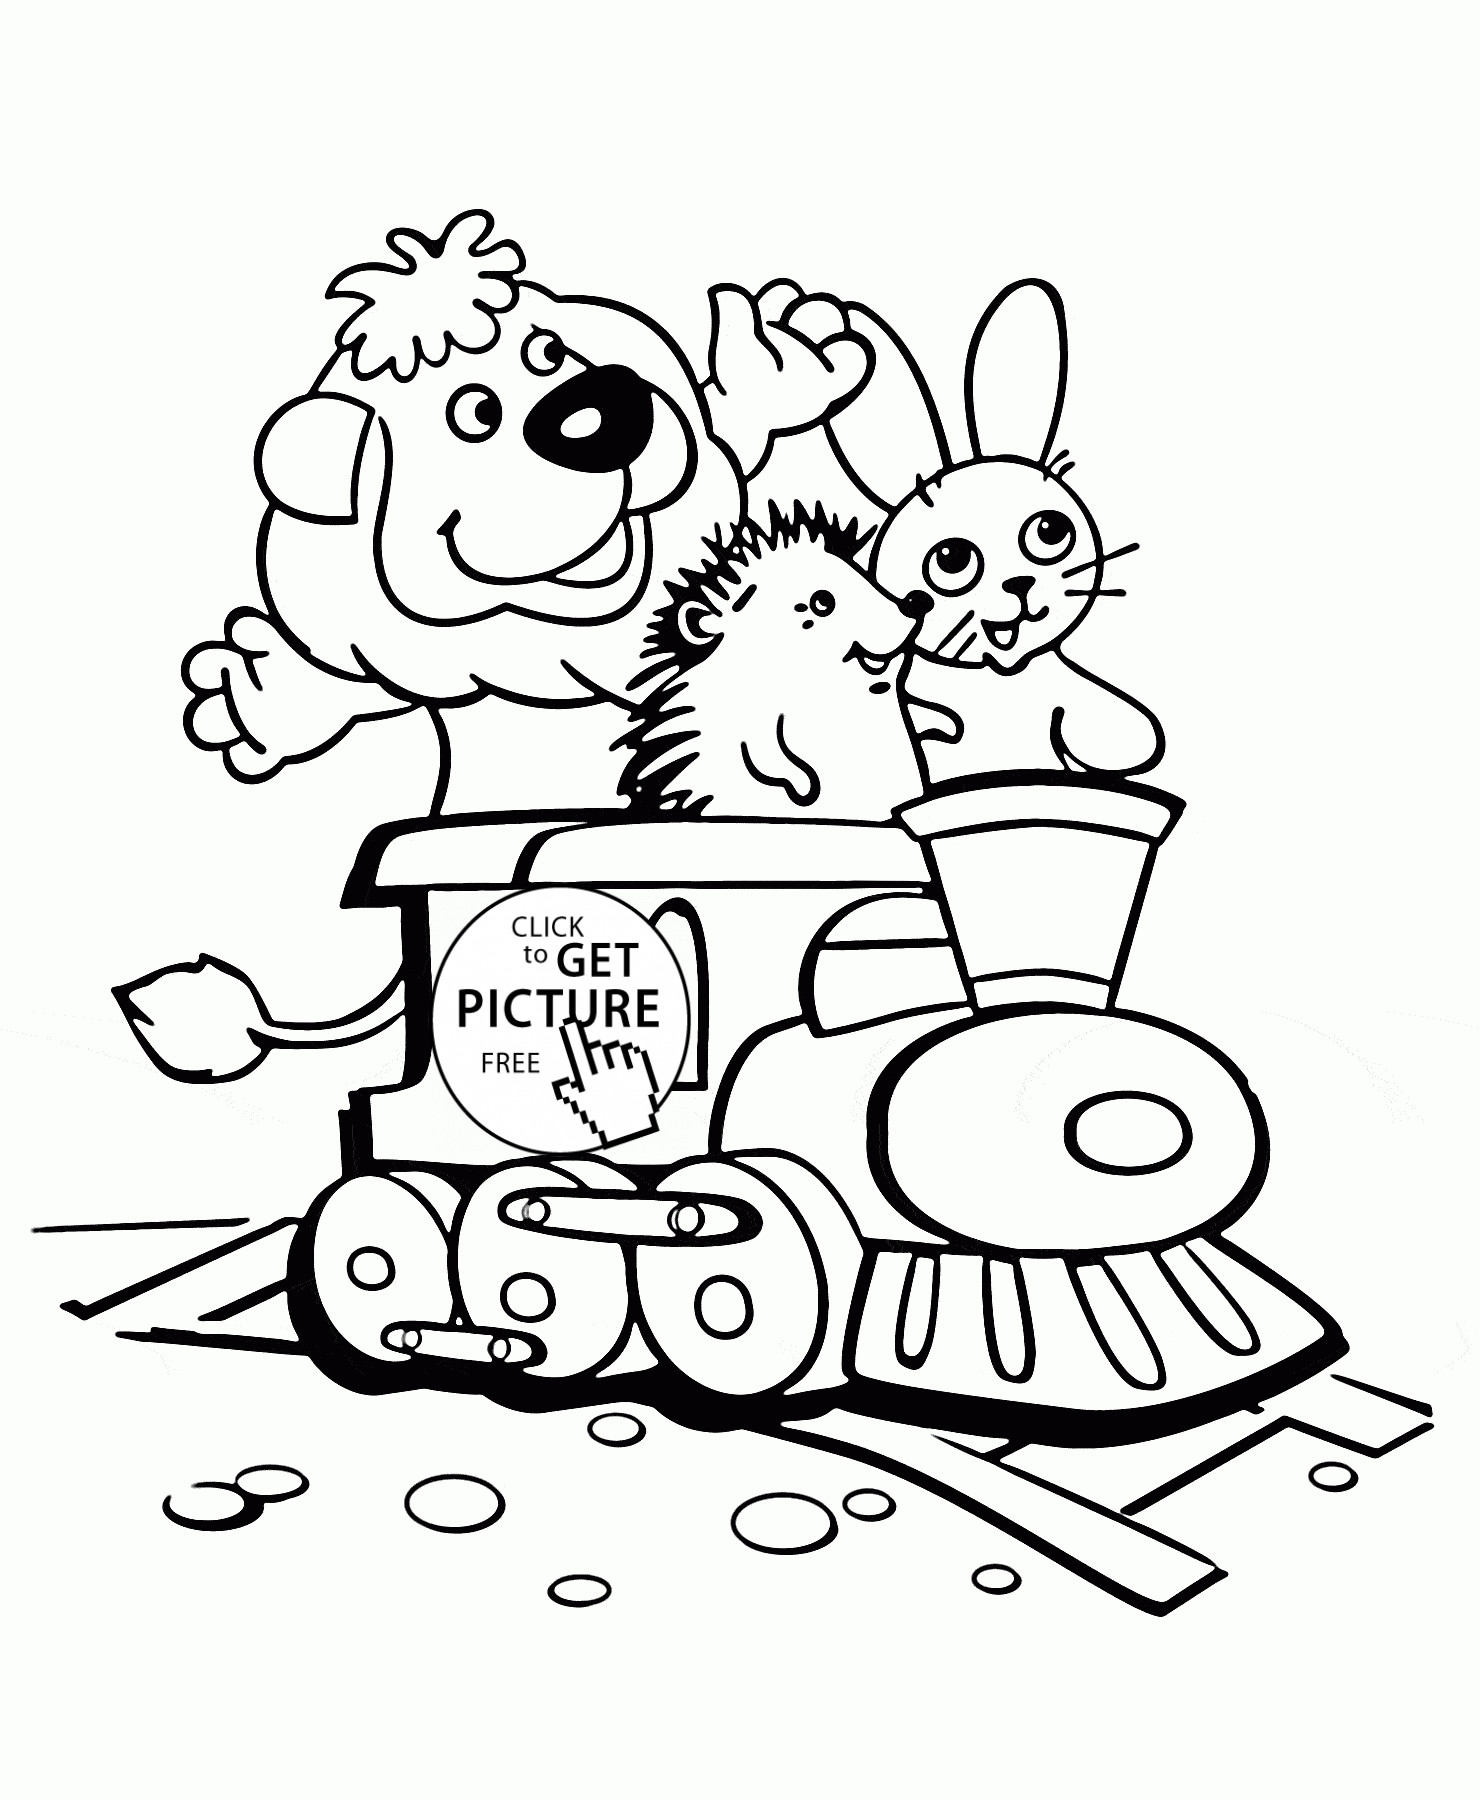 Toddler Animal Coloring Pages
 Animal Coloring Pages For Toddlers Coloring Home